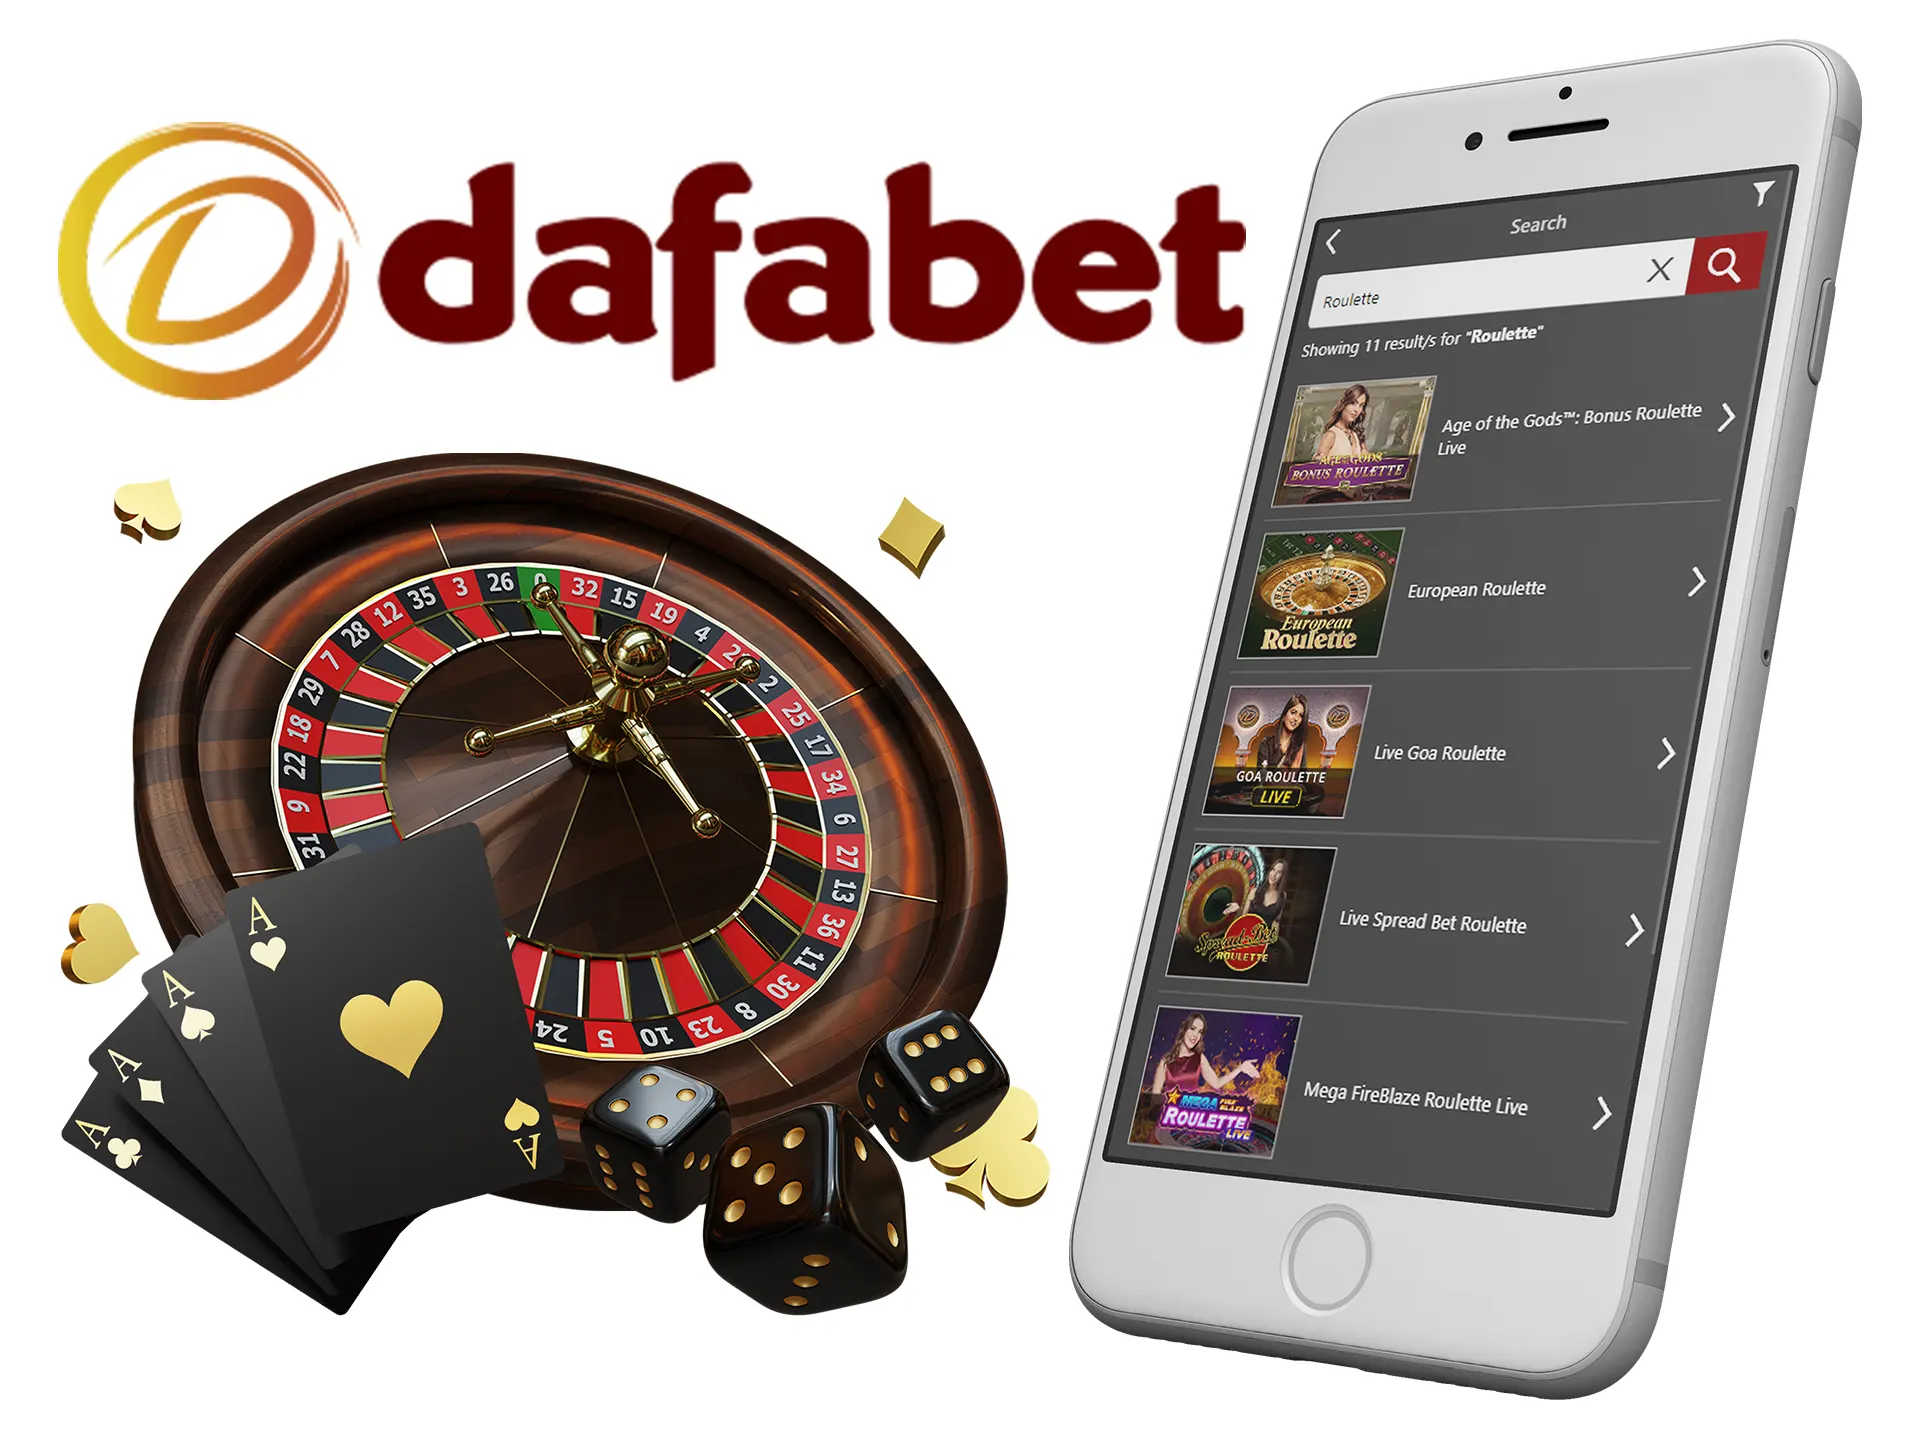 Spin roulette in various roulette games at Dafabet.